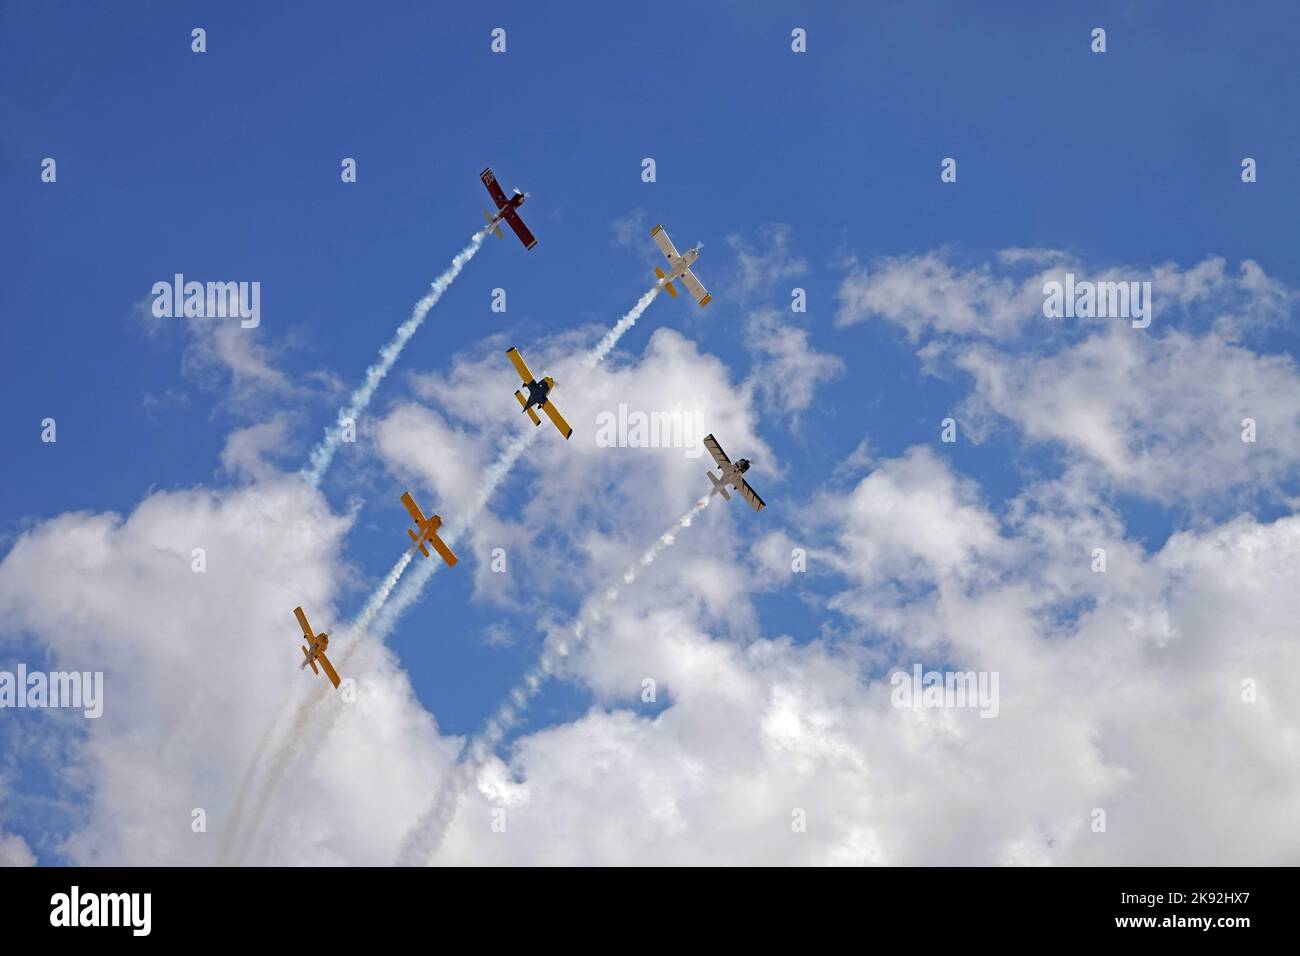 Edwards Air Force Base, California / USA - Oct. 15, 2022: The Dawn Patrol formation flying team flies over while emitting aerobatic smoke trails. Stock Photo